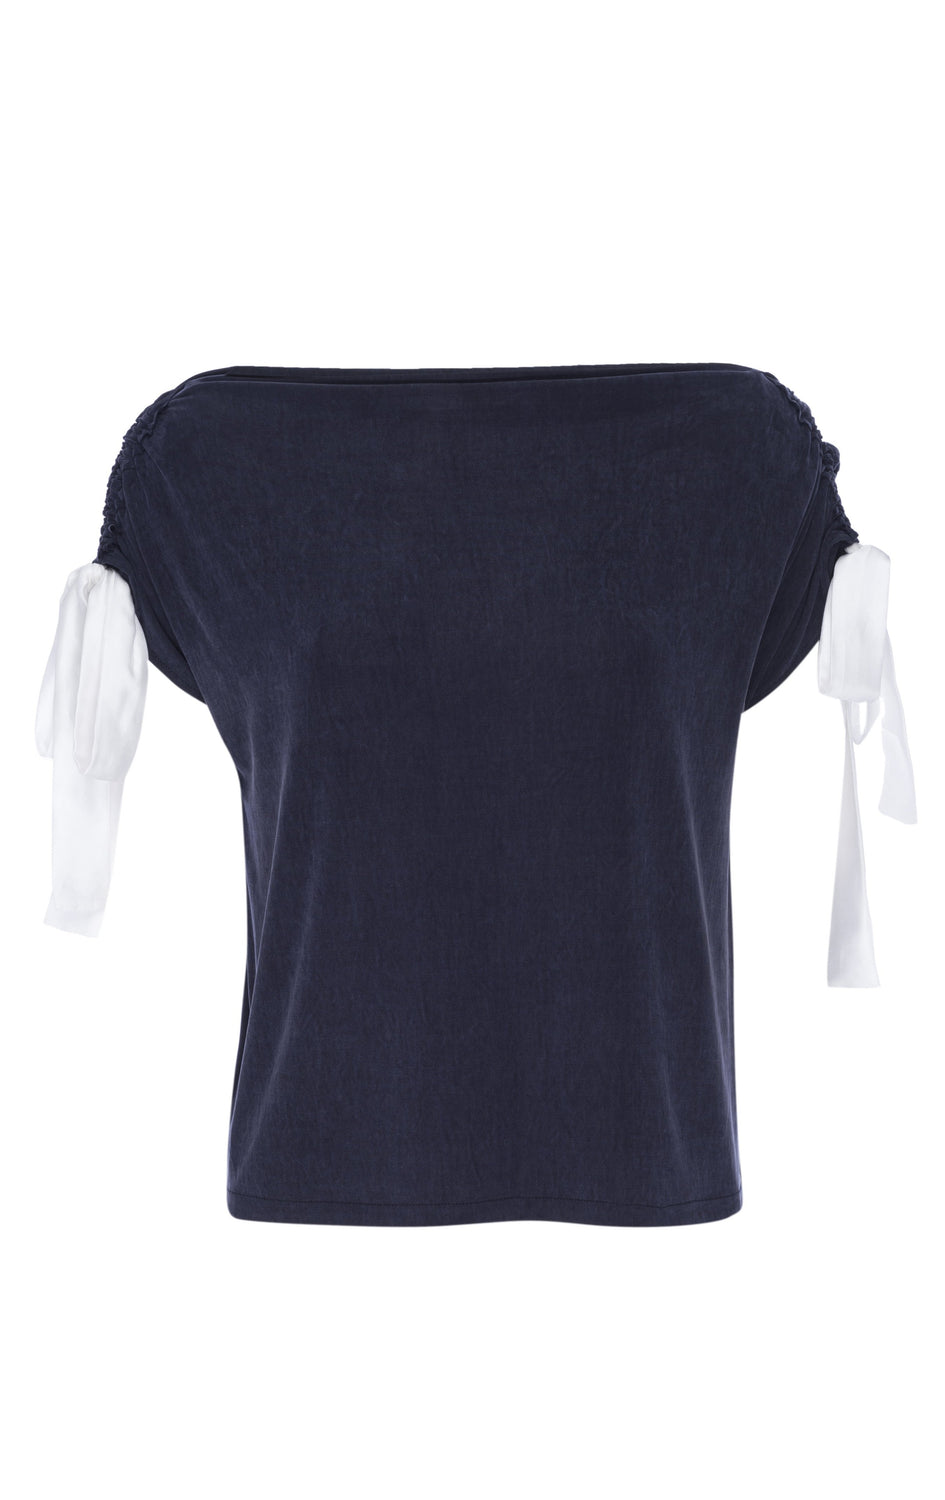 knit off-the-shoulder interchangable top with white ties